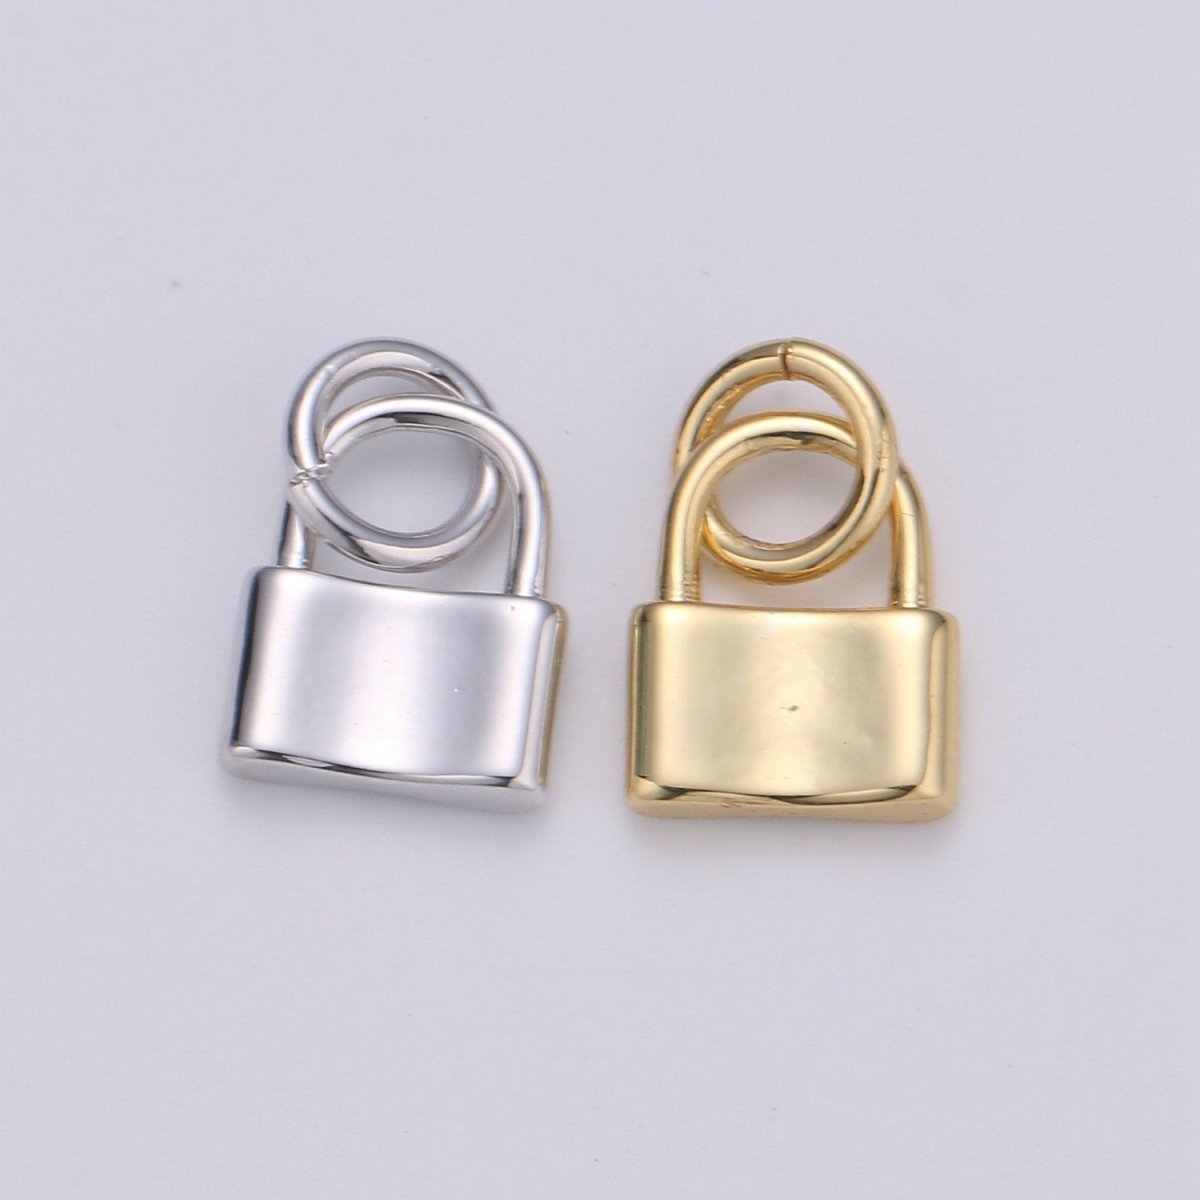 7X10mm Mini Lock Charm in 24K Gold Filled lock charm for earring bracelet necklace, Small Dainty Gold Padlock Charm, Silver Lock Jewelry | D-670, D-671 - DLUXCA